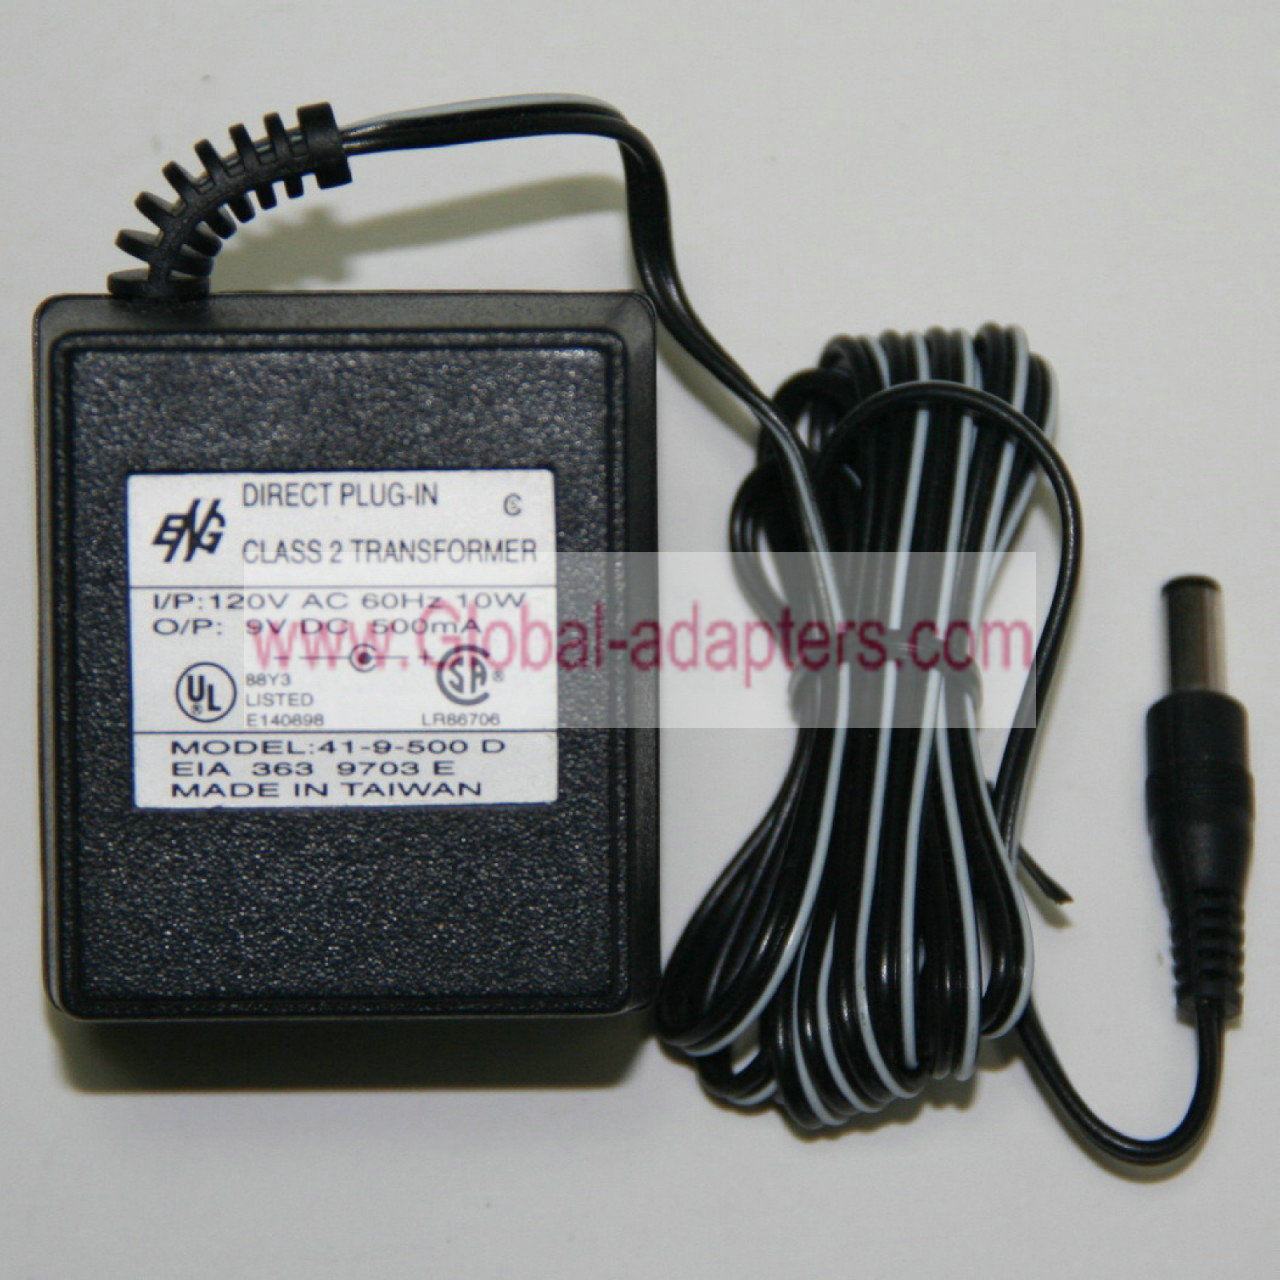 New ENG 9VDC 500mA 41-9-500D Power Adapter for some mixers 9vDC